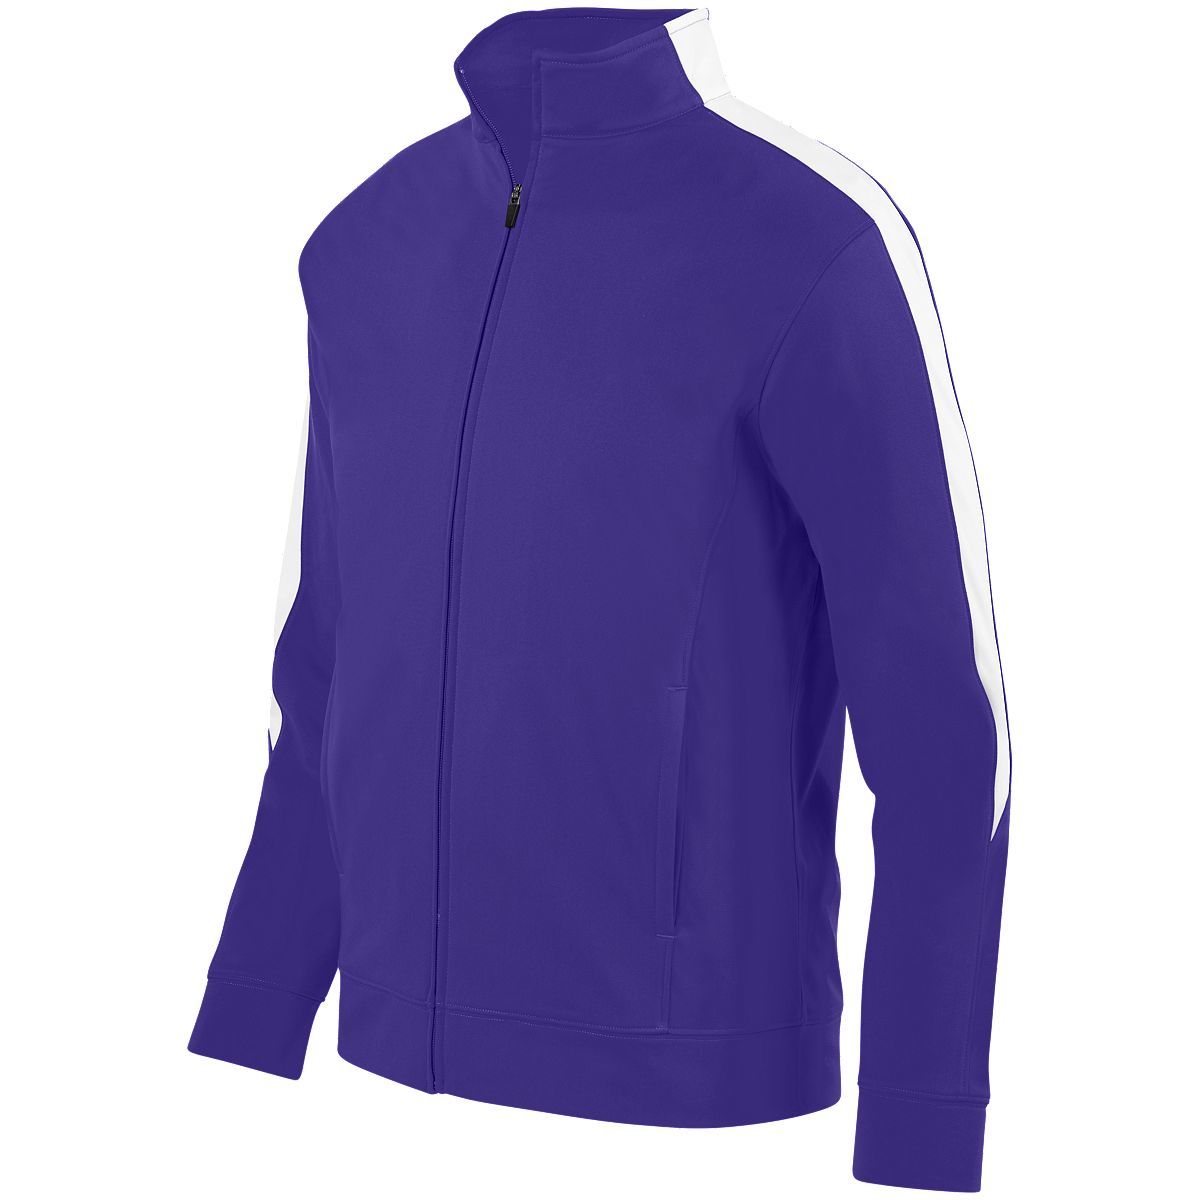 Augusta Sportswear Youth Medalist Jacket 2.0 in Purple/White  -Part of the Youth, Youth-Jacket, Augusta-Products, Outerwear product lines at KanaleyCreations.com